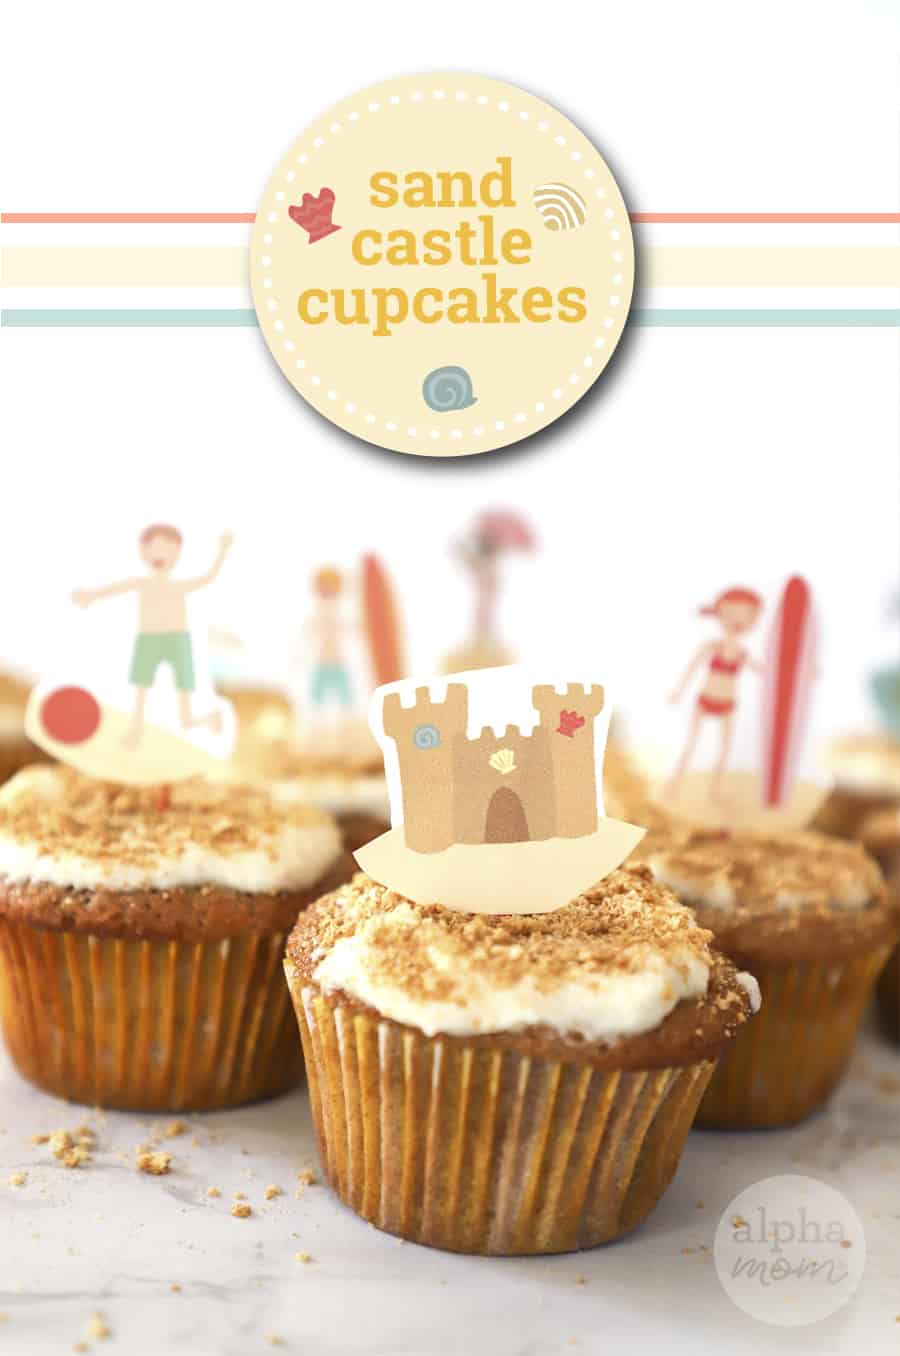 Beach-themed Cupcakes decorated with illustrated toppers and announcing "sandcastle cupcakes" 